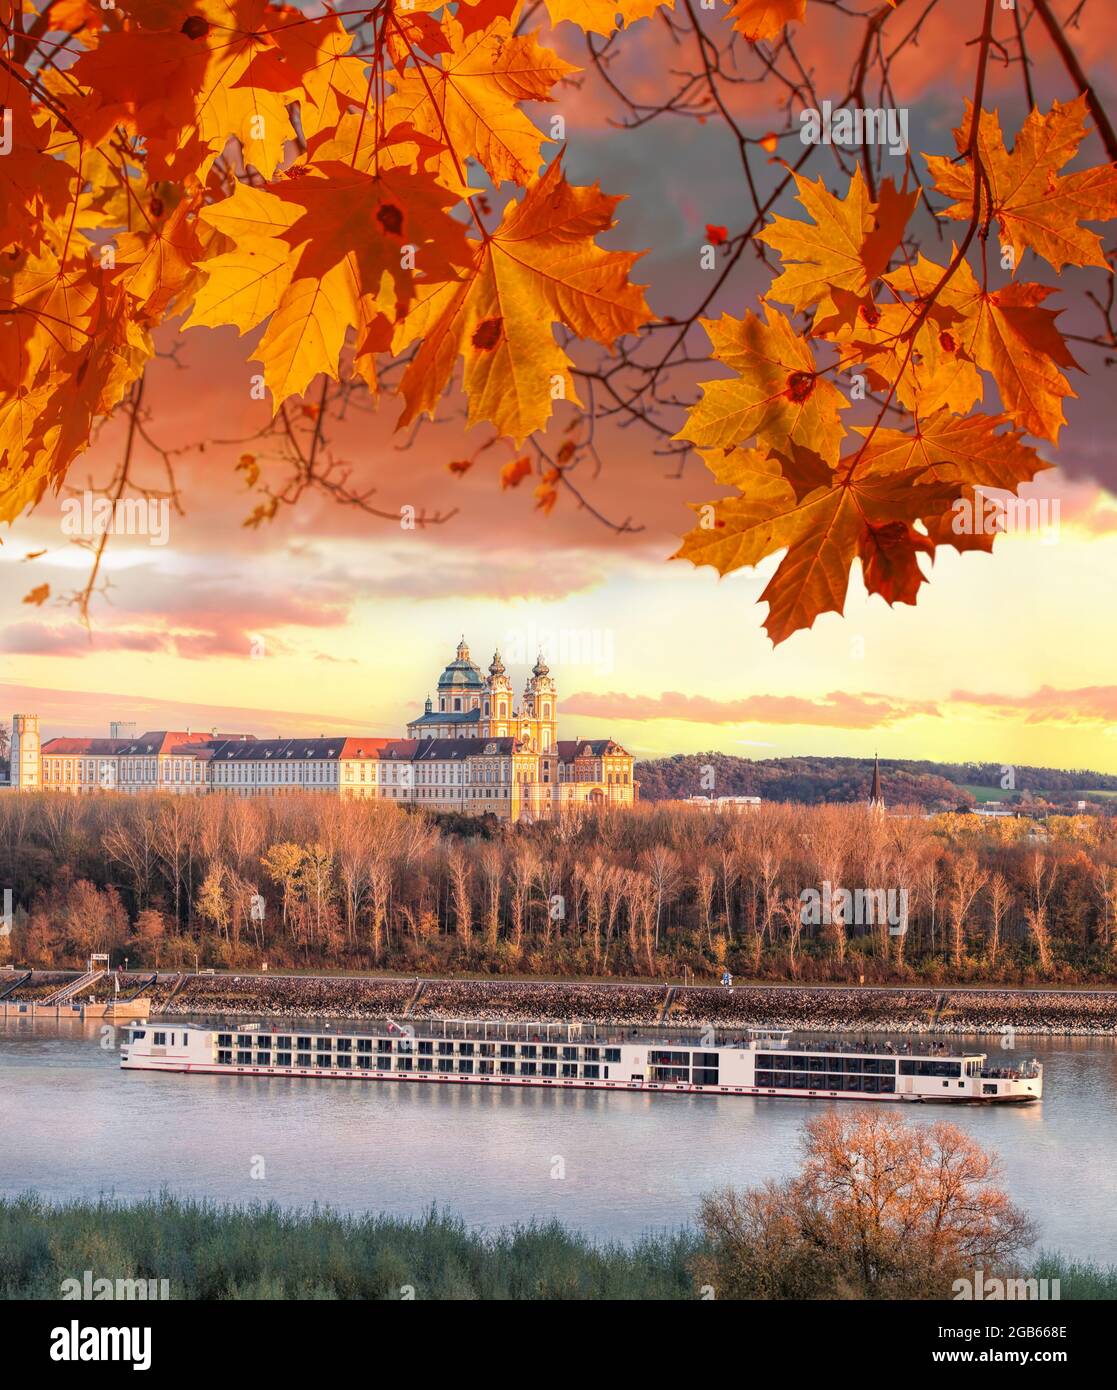 Panorama of Melk abbey with Danube river and autumn forest in Austria Stock Photo